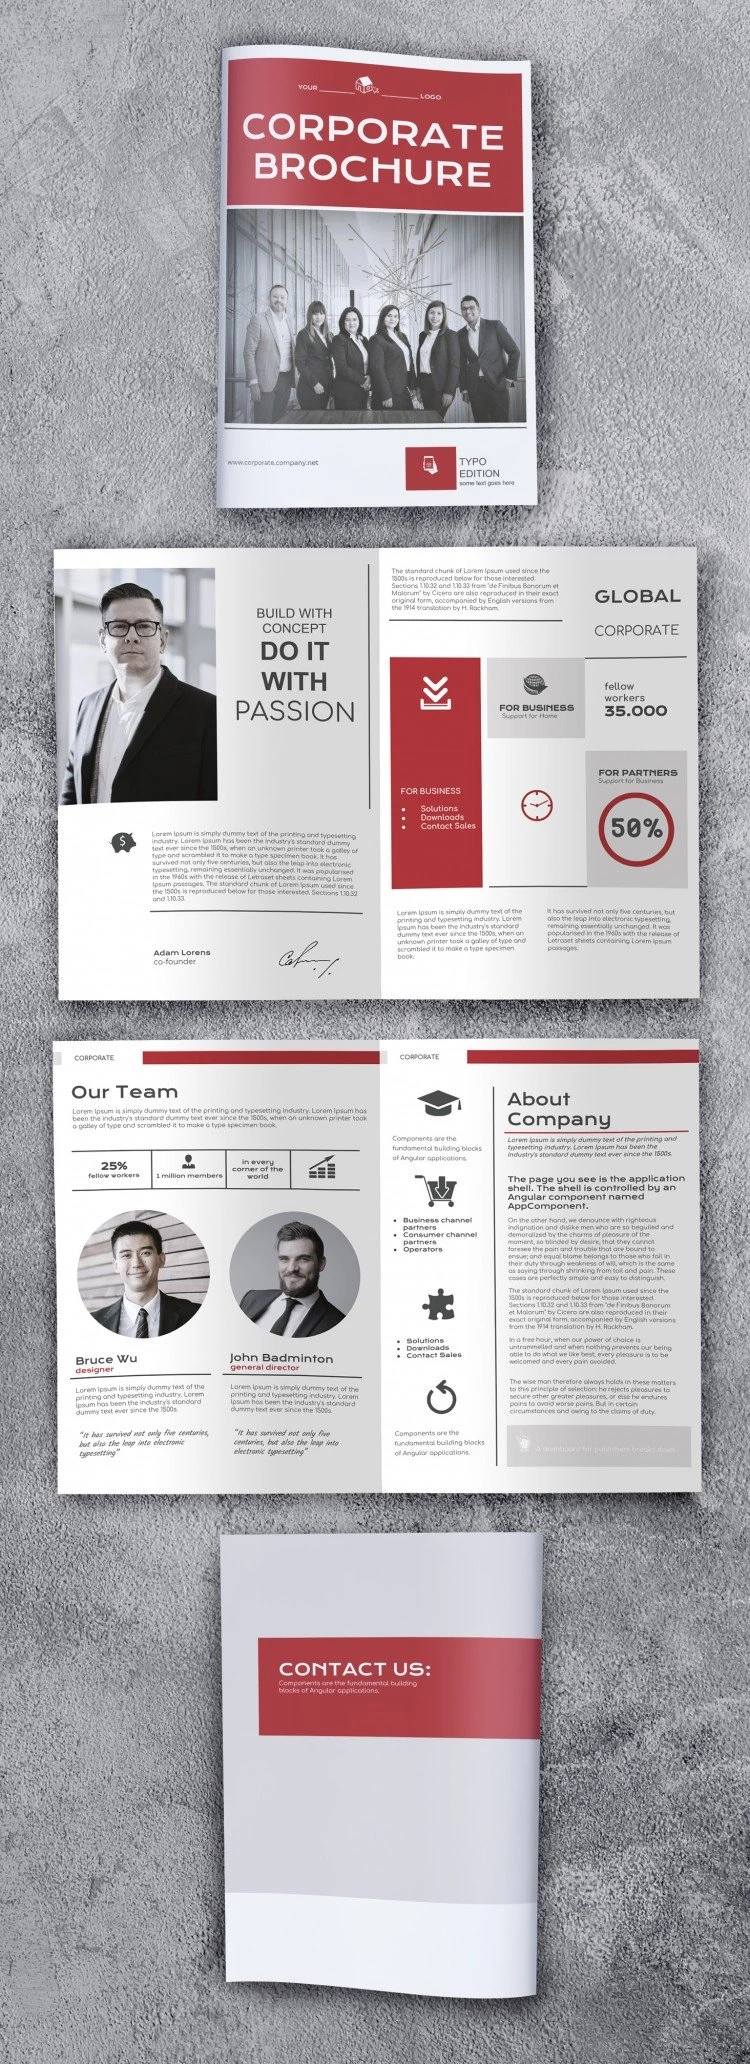 Red Corporate Brochure - free Google Docs Template - 10061523